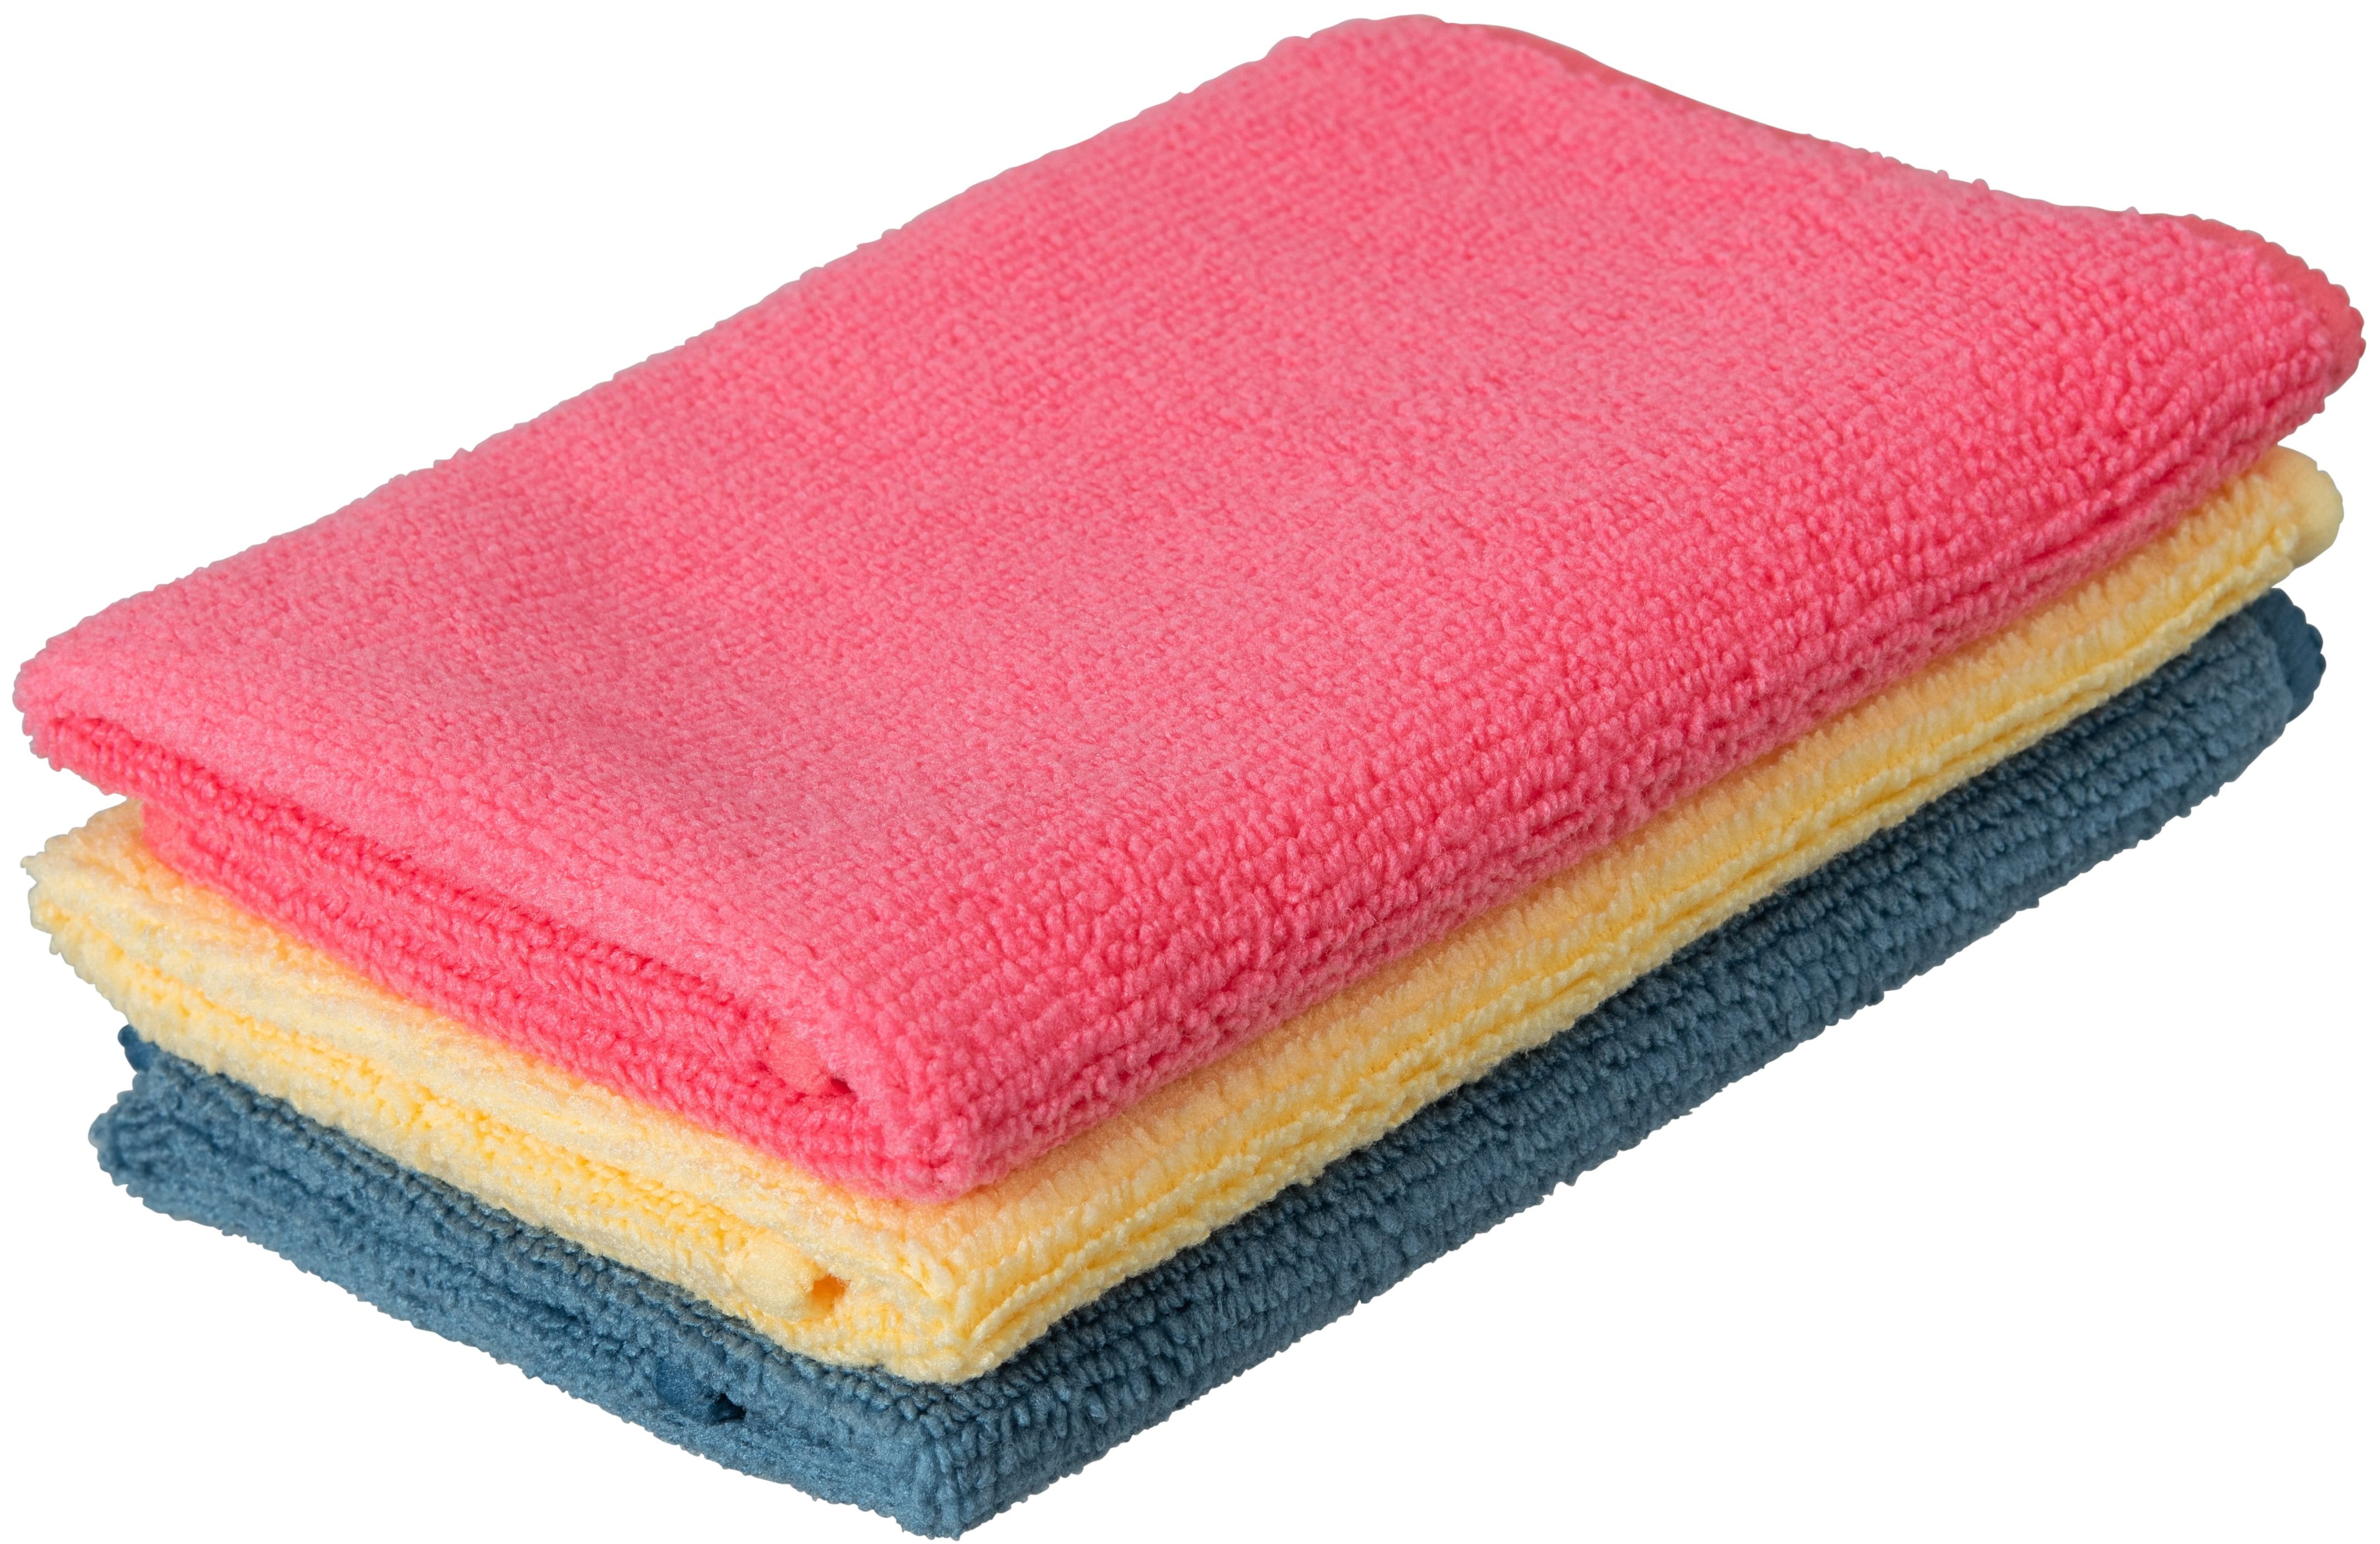 Superio Ultra Microfiber Miracle Cloth 16x16 - 3 Pack 